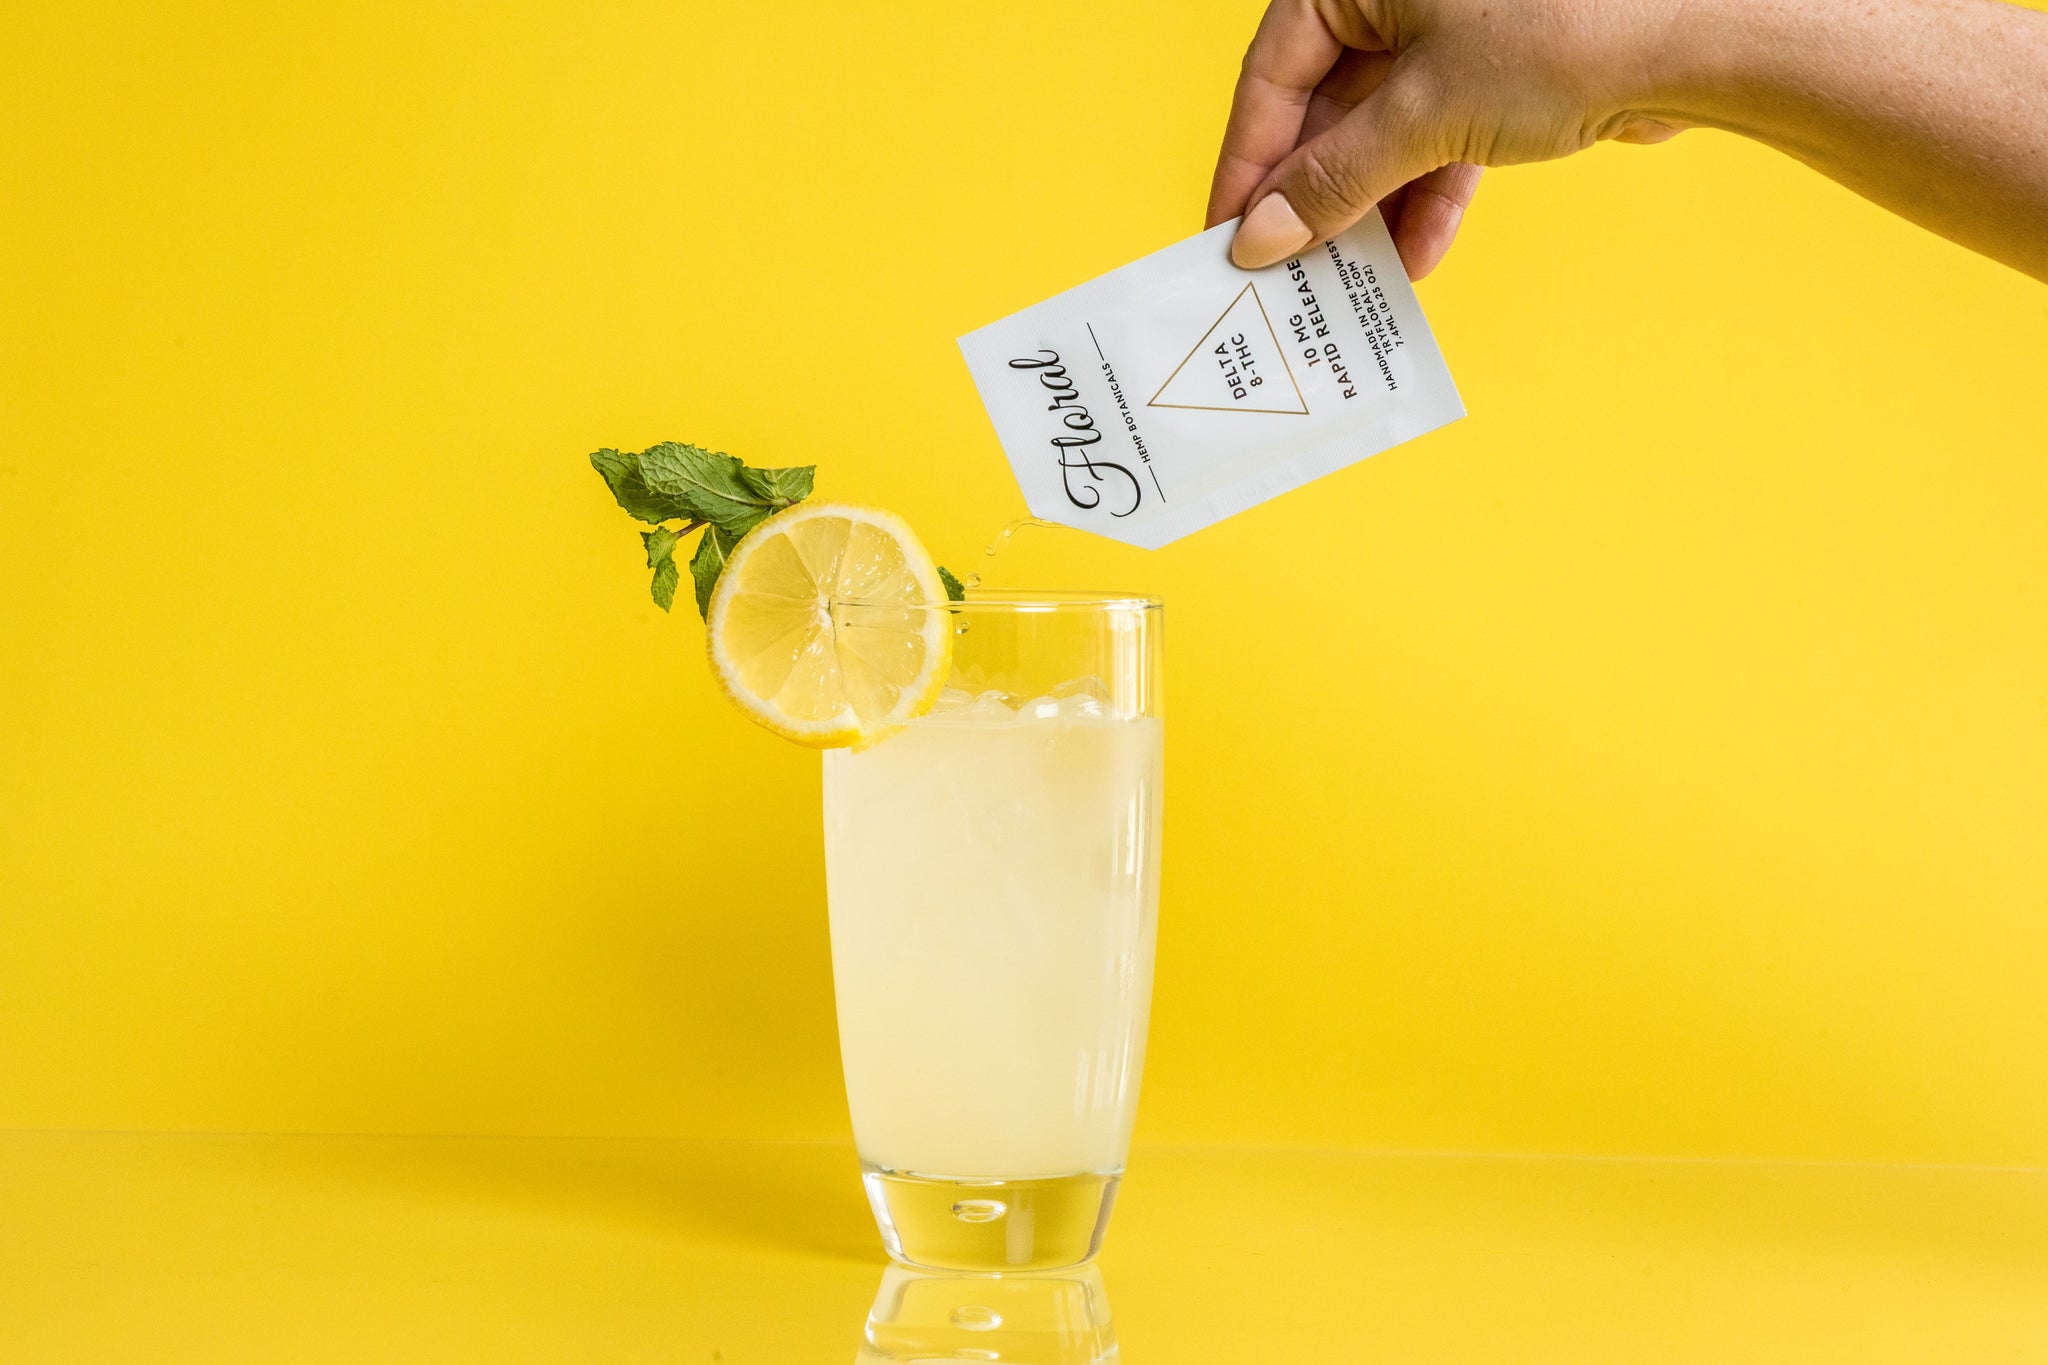 A hand pouring a packet of Floral Beverages' Floral Cocktail Enhancer into a glass of lemonade. The glass has a lemon wedge on it and is against a bright yellow background.